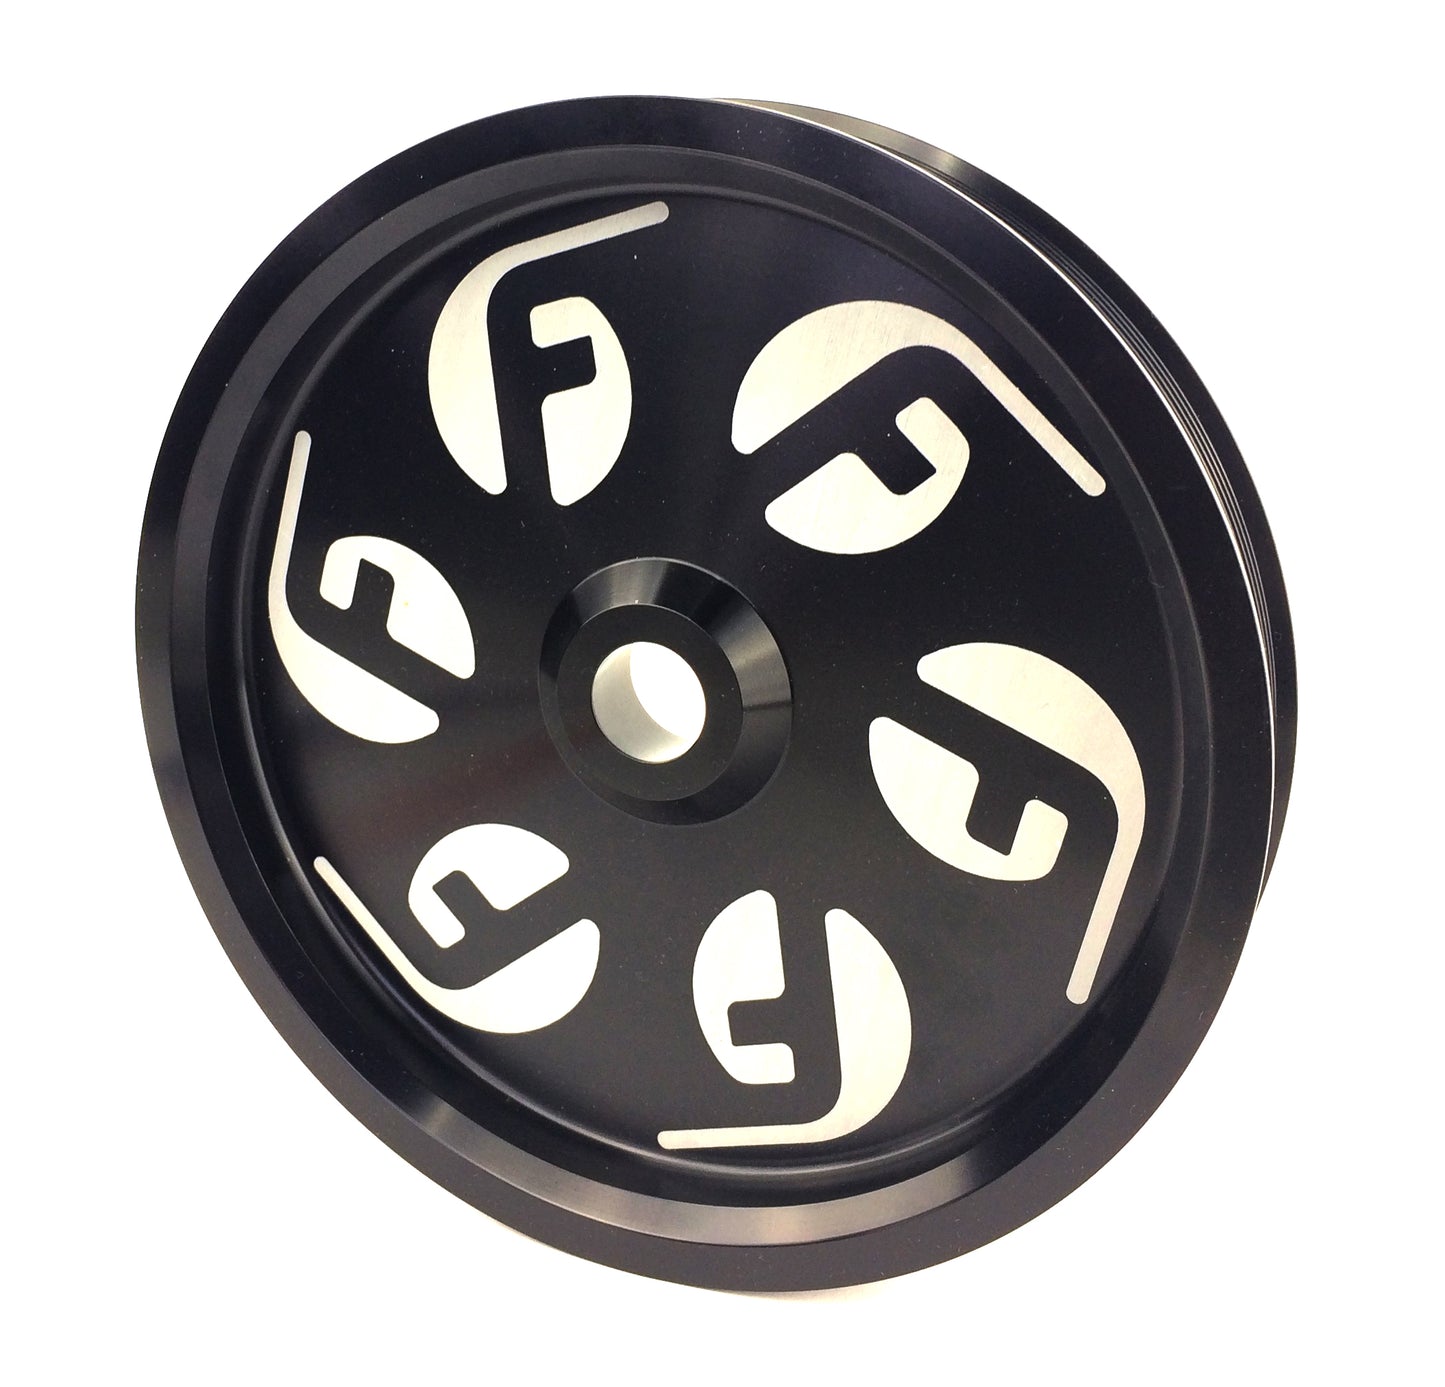 Cummins Dual Pump Pulley (for use with FPE dual pump bracket) Black